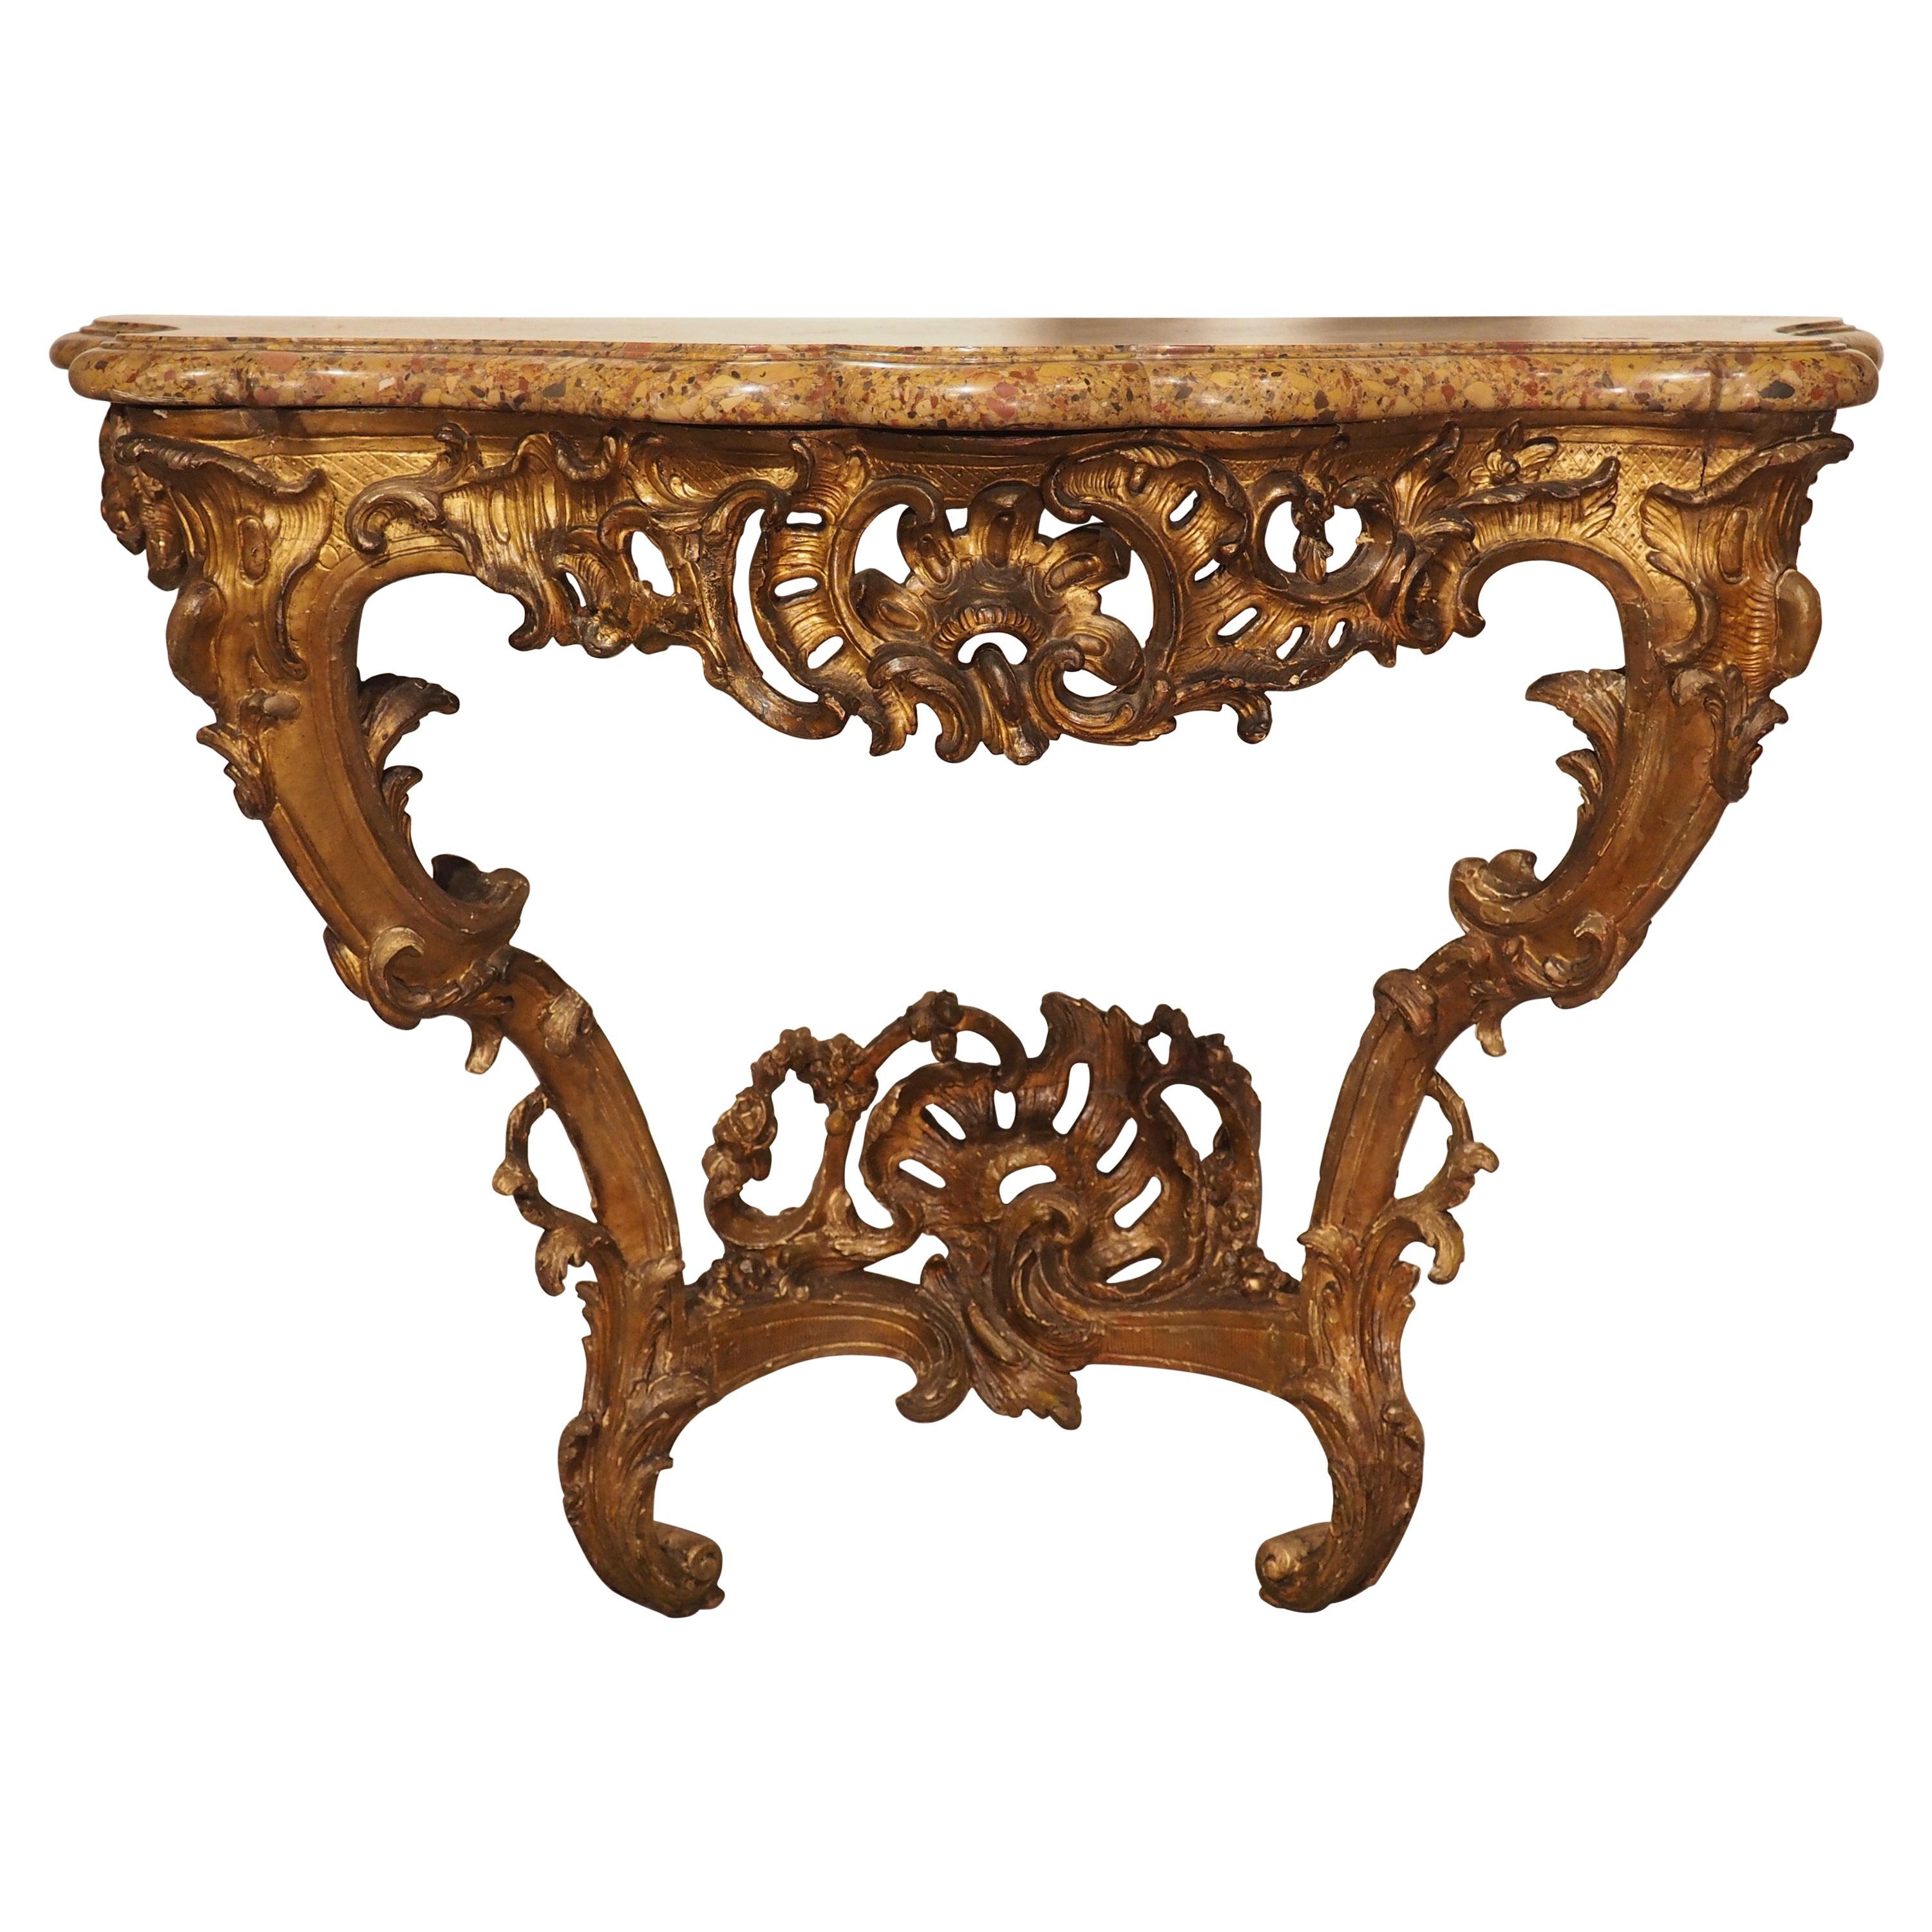 Louis XV Giltwood and Breche D'alep Marble Console Table from France, Circa 1750